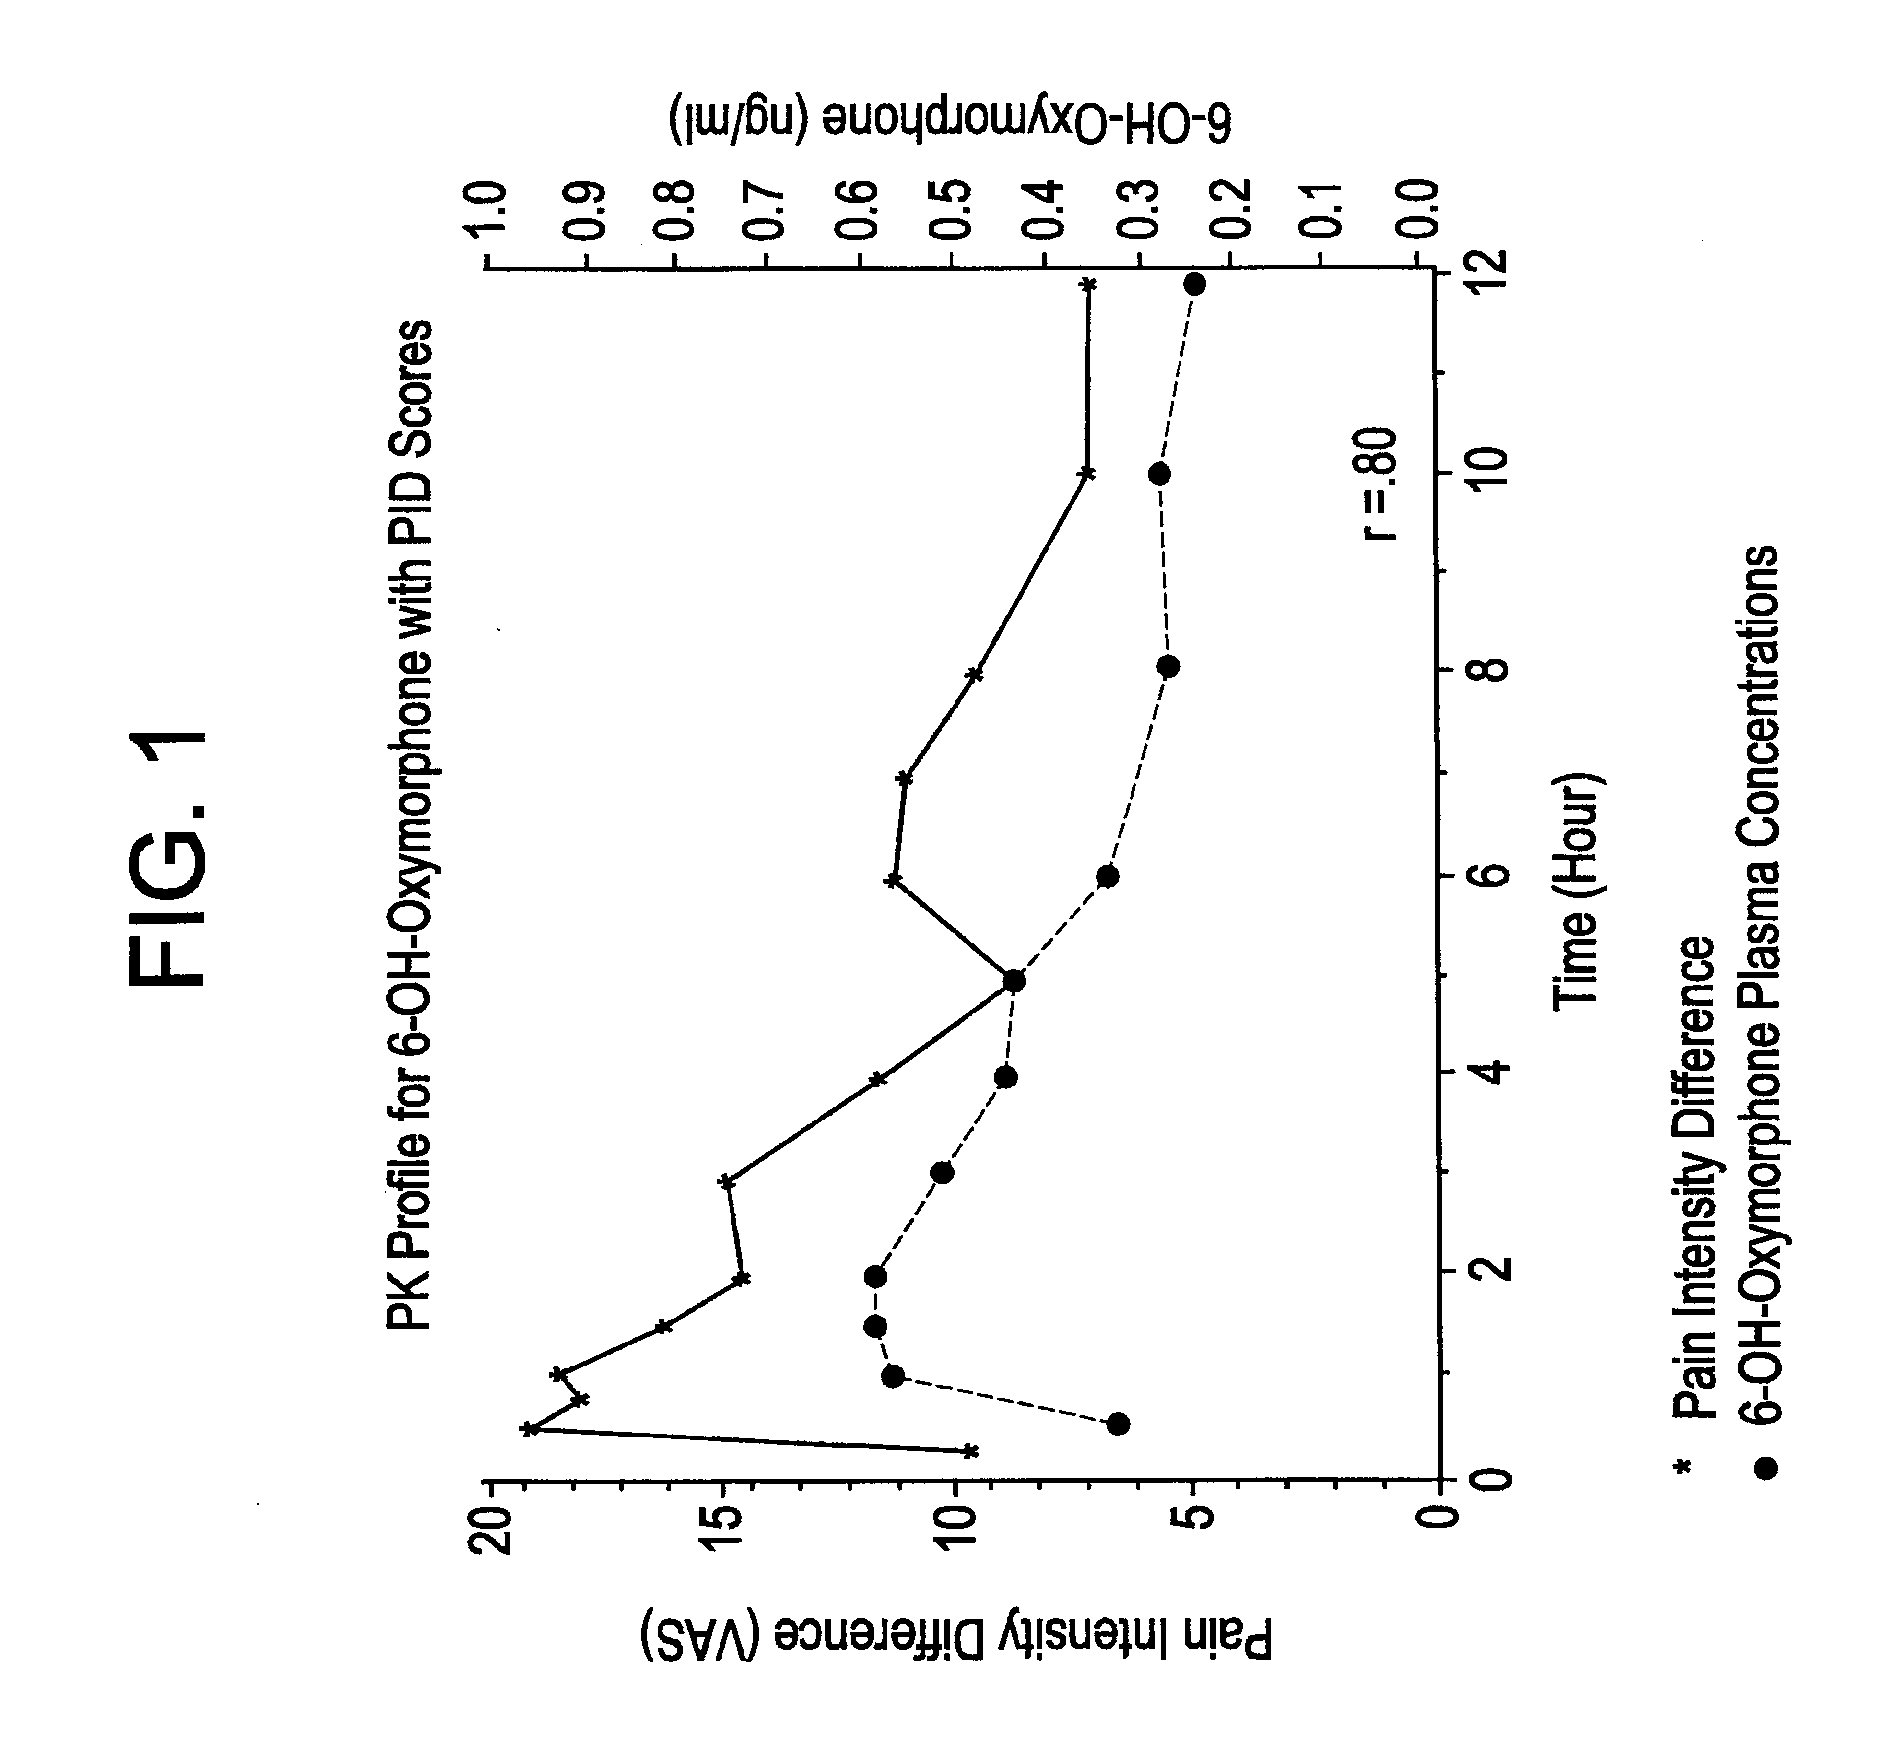 Method of Treating Pain Utilizing Controlled Release Oxymorphone Pharmaceutical Compositions and Instruction on Dosing for Hepatic Impairment